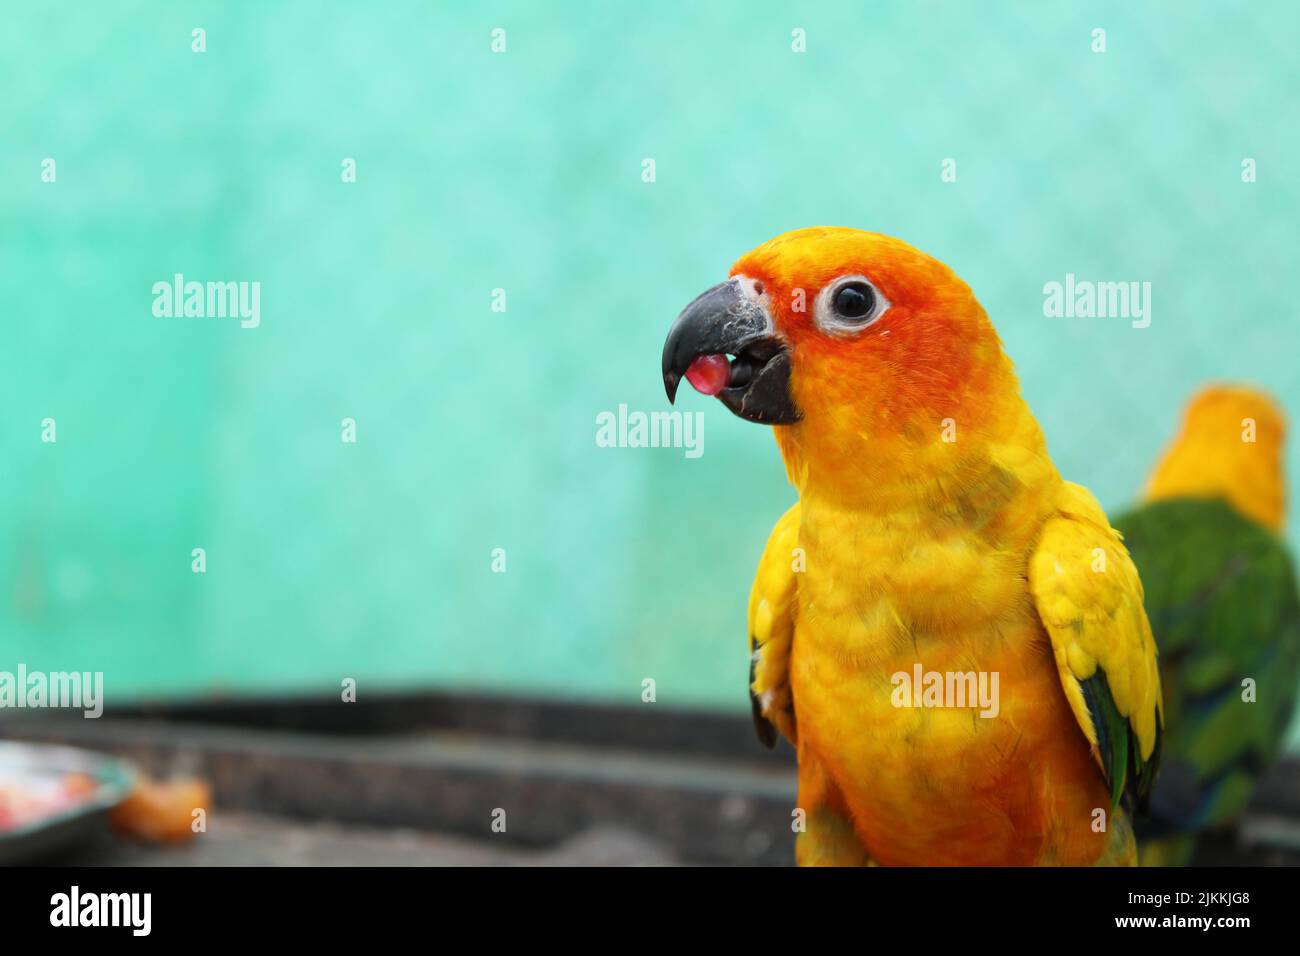 A portrait of two yellow and green parrots and a turquoise background Stock Photo